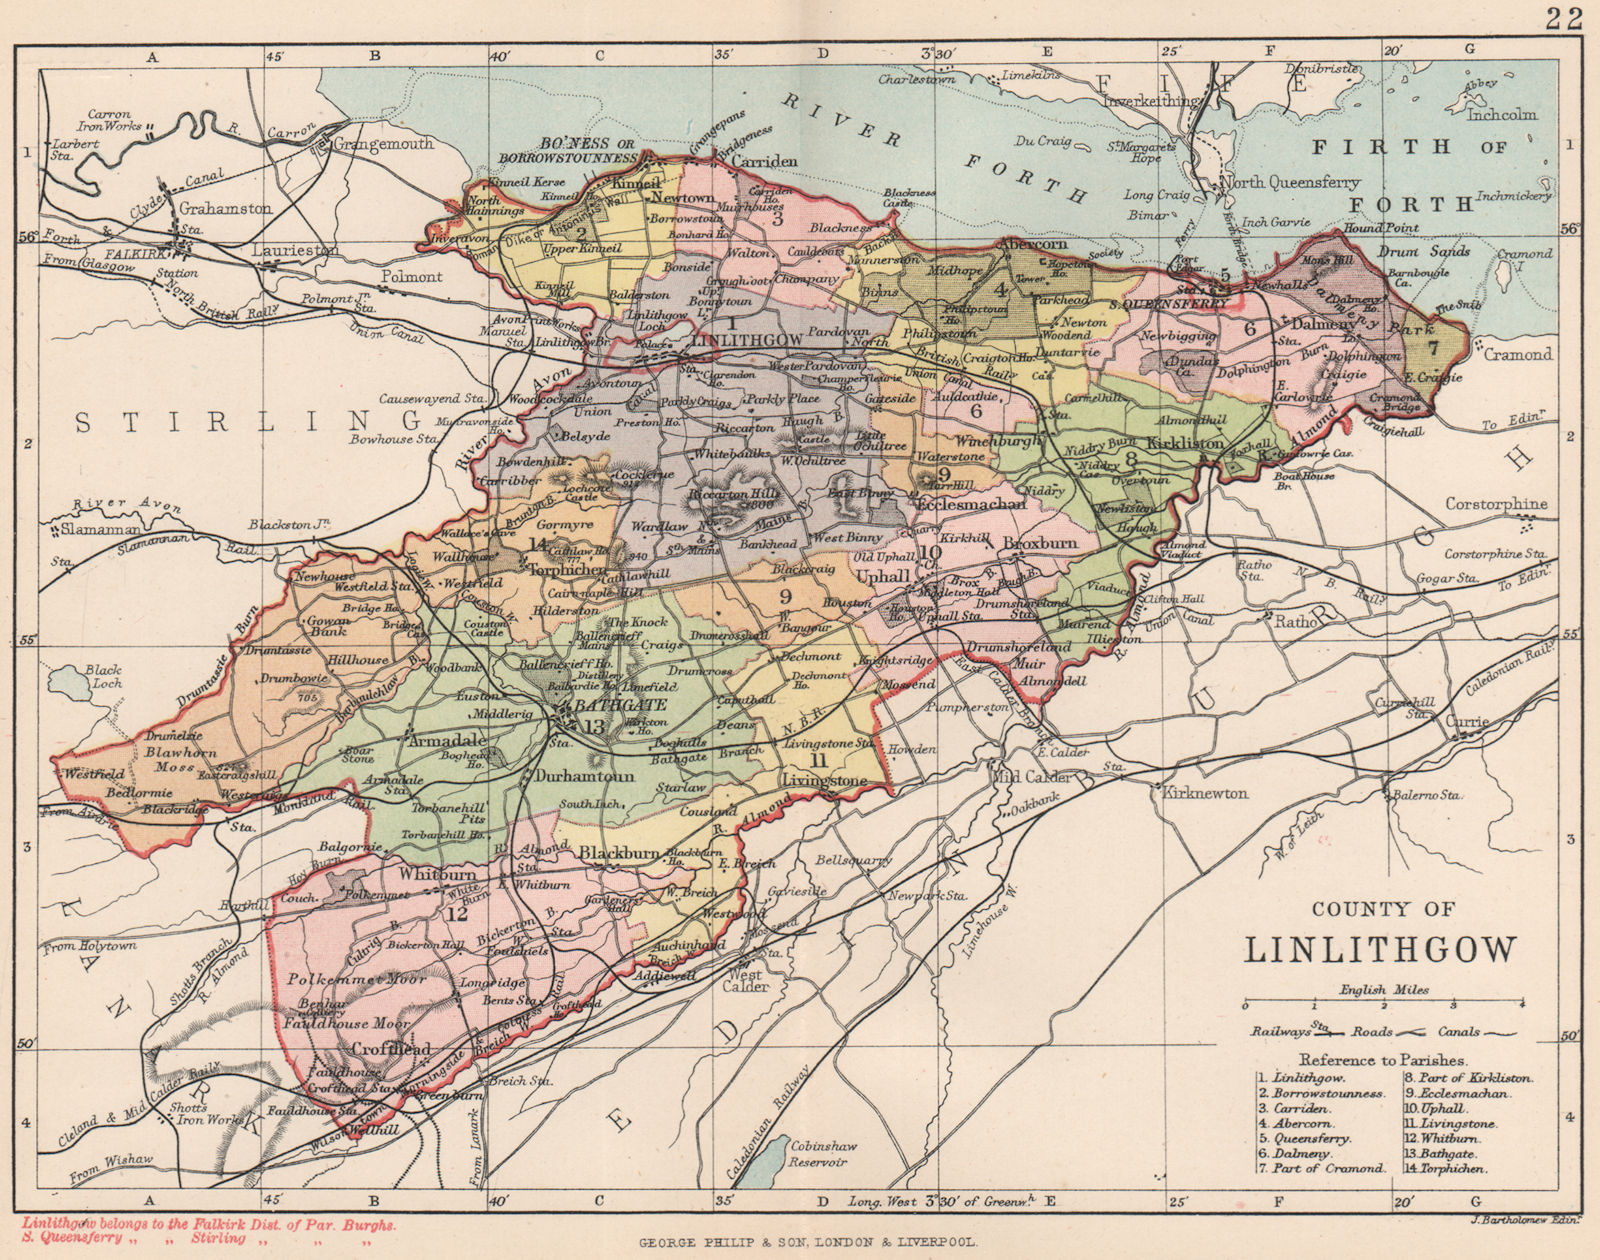 'County of Linlithgow'. Linlithgowshire. Parishes. BARTHOLOMEW 1891 old map